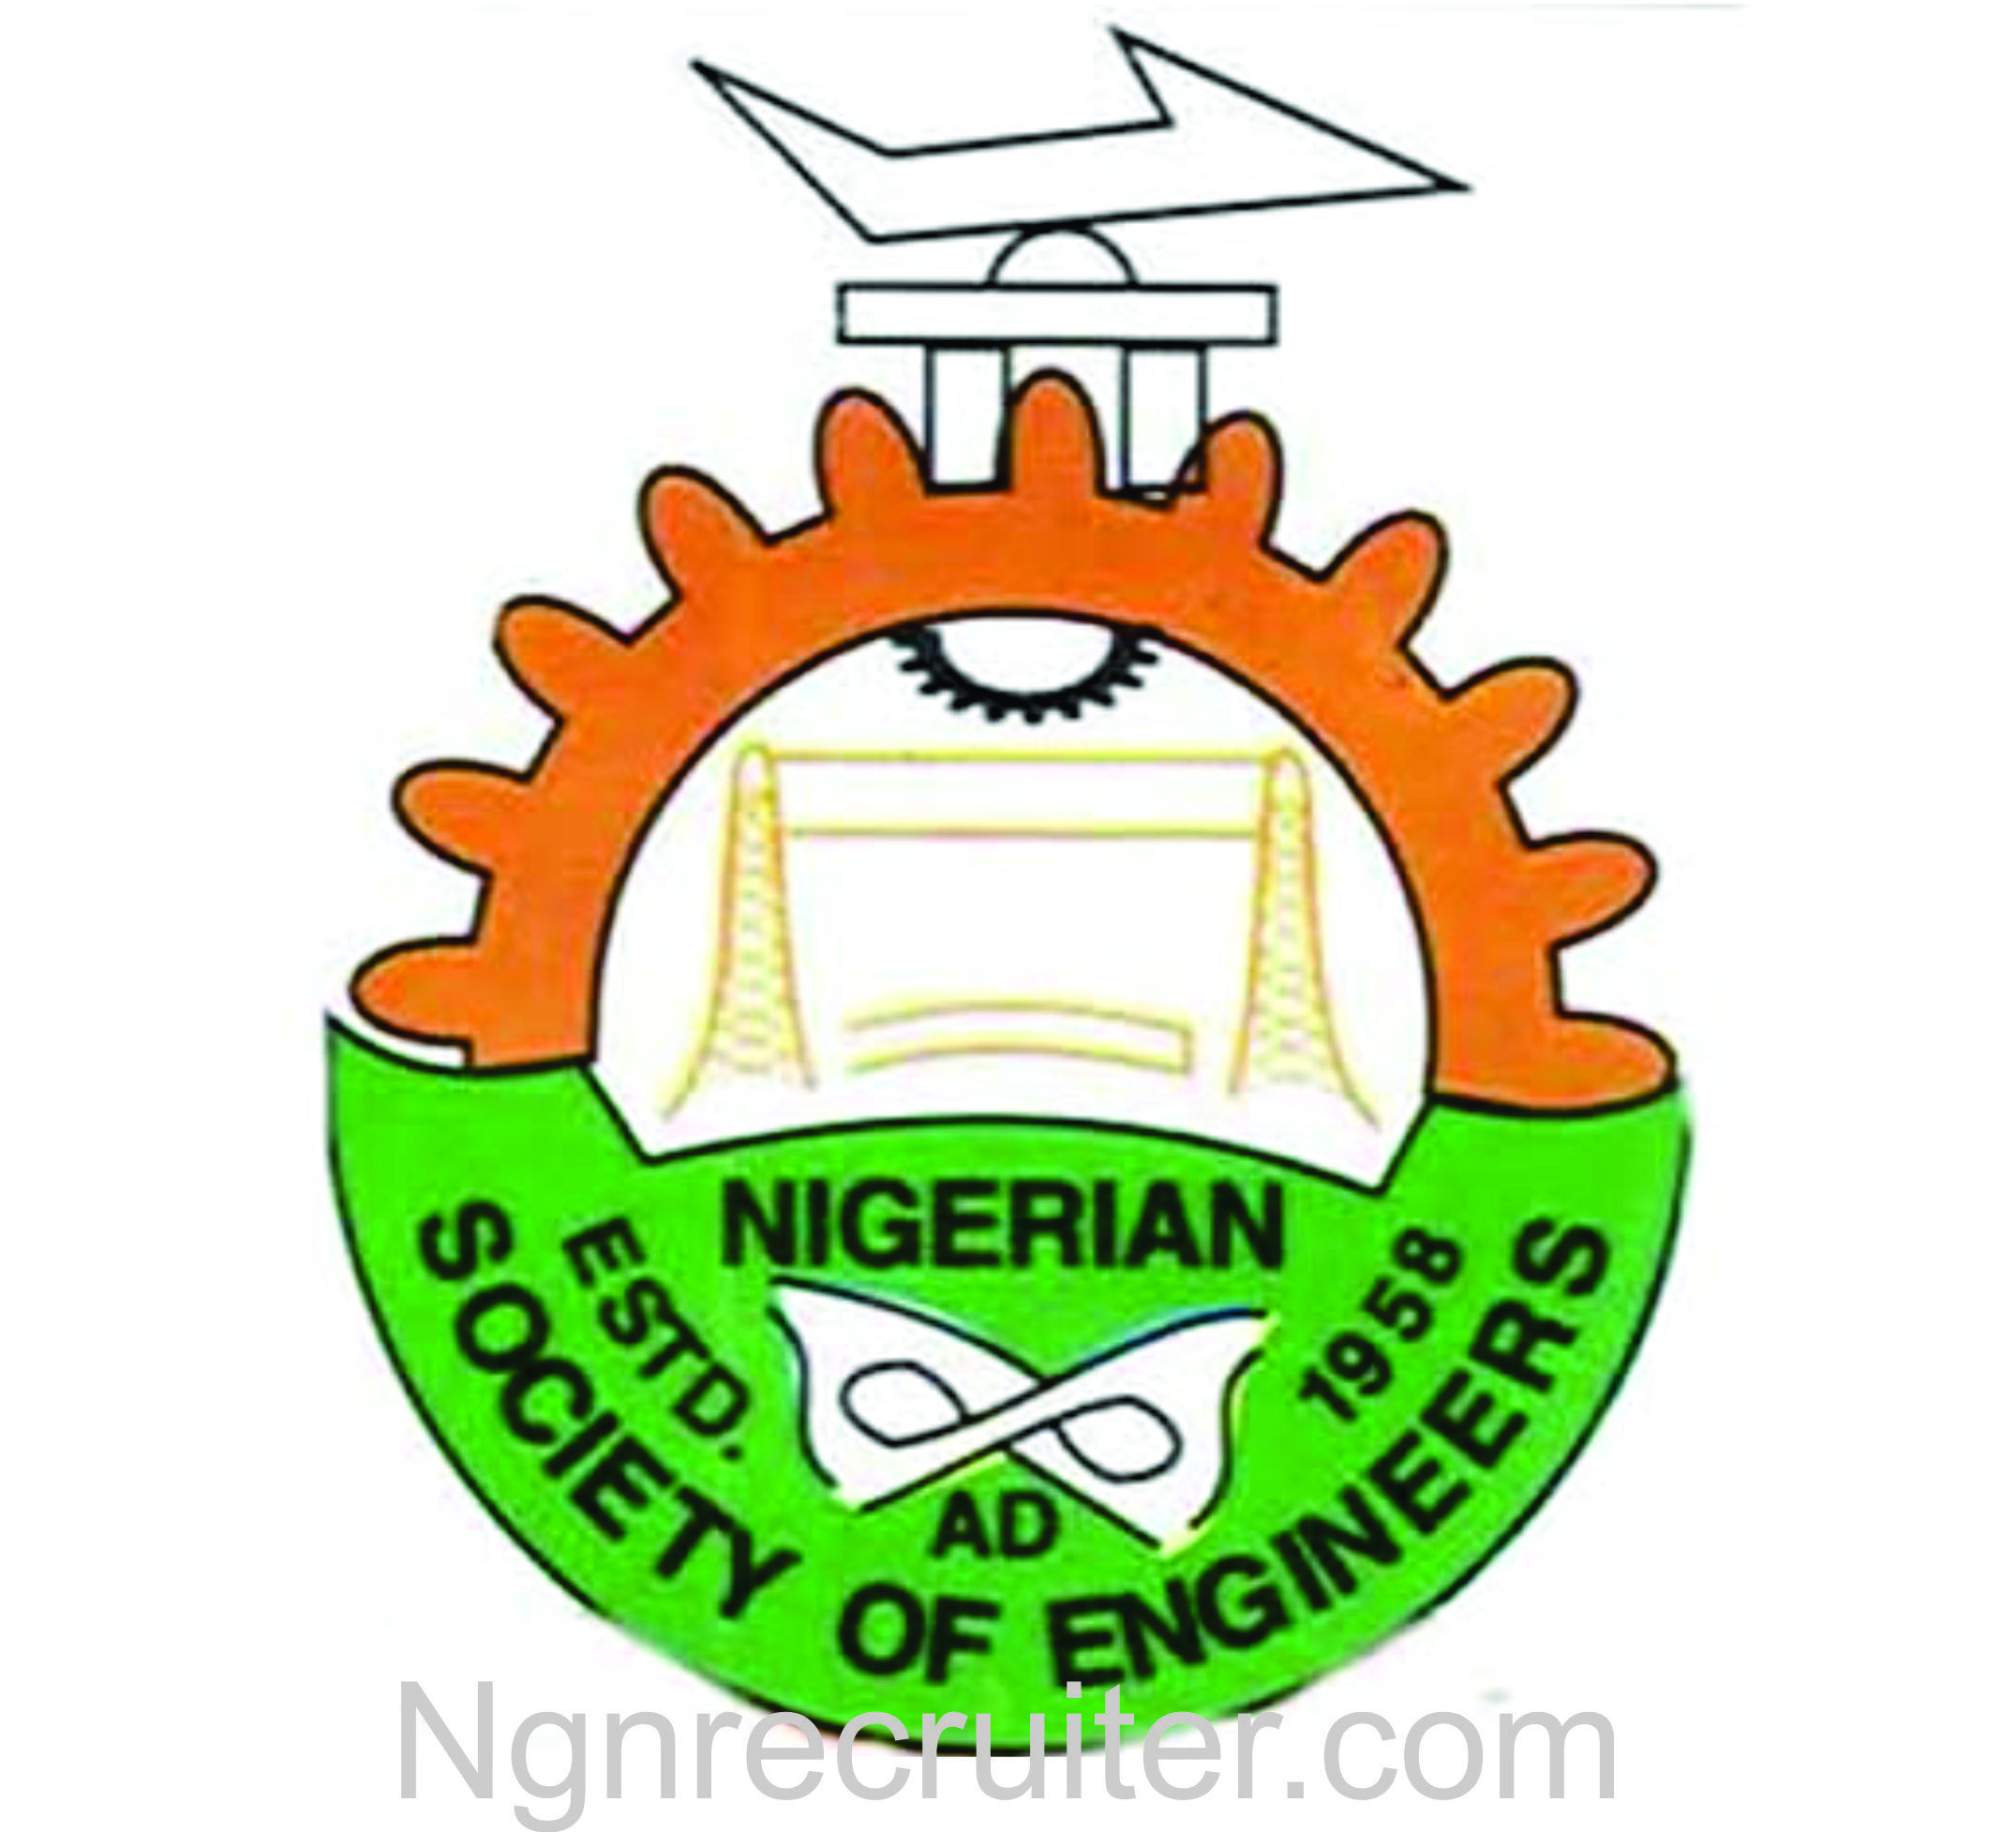 Nigerian Society of Engineers (NSE) Application Form – How to Become NSE Member